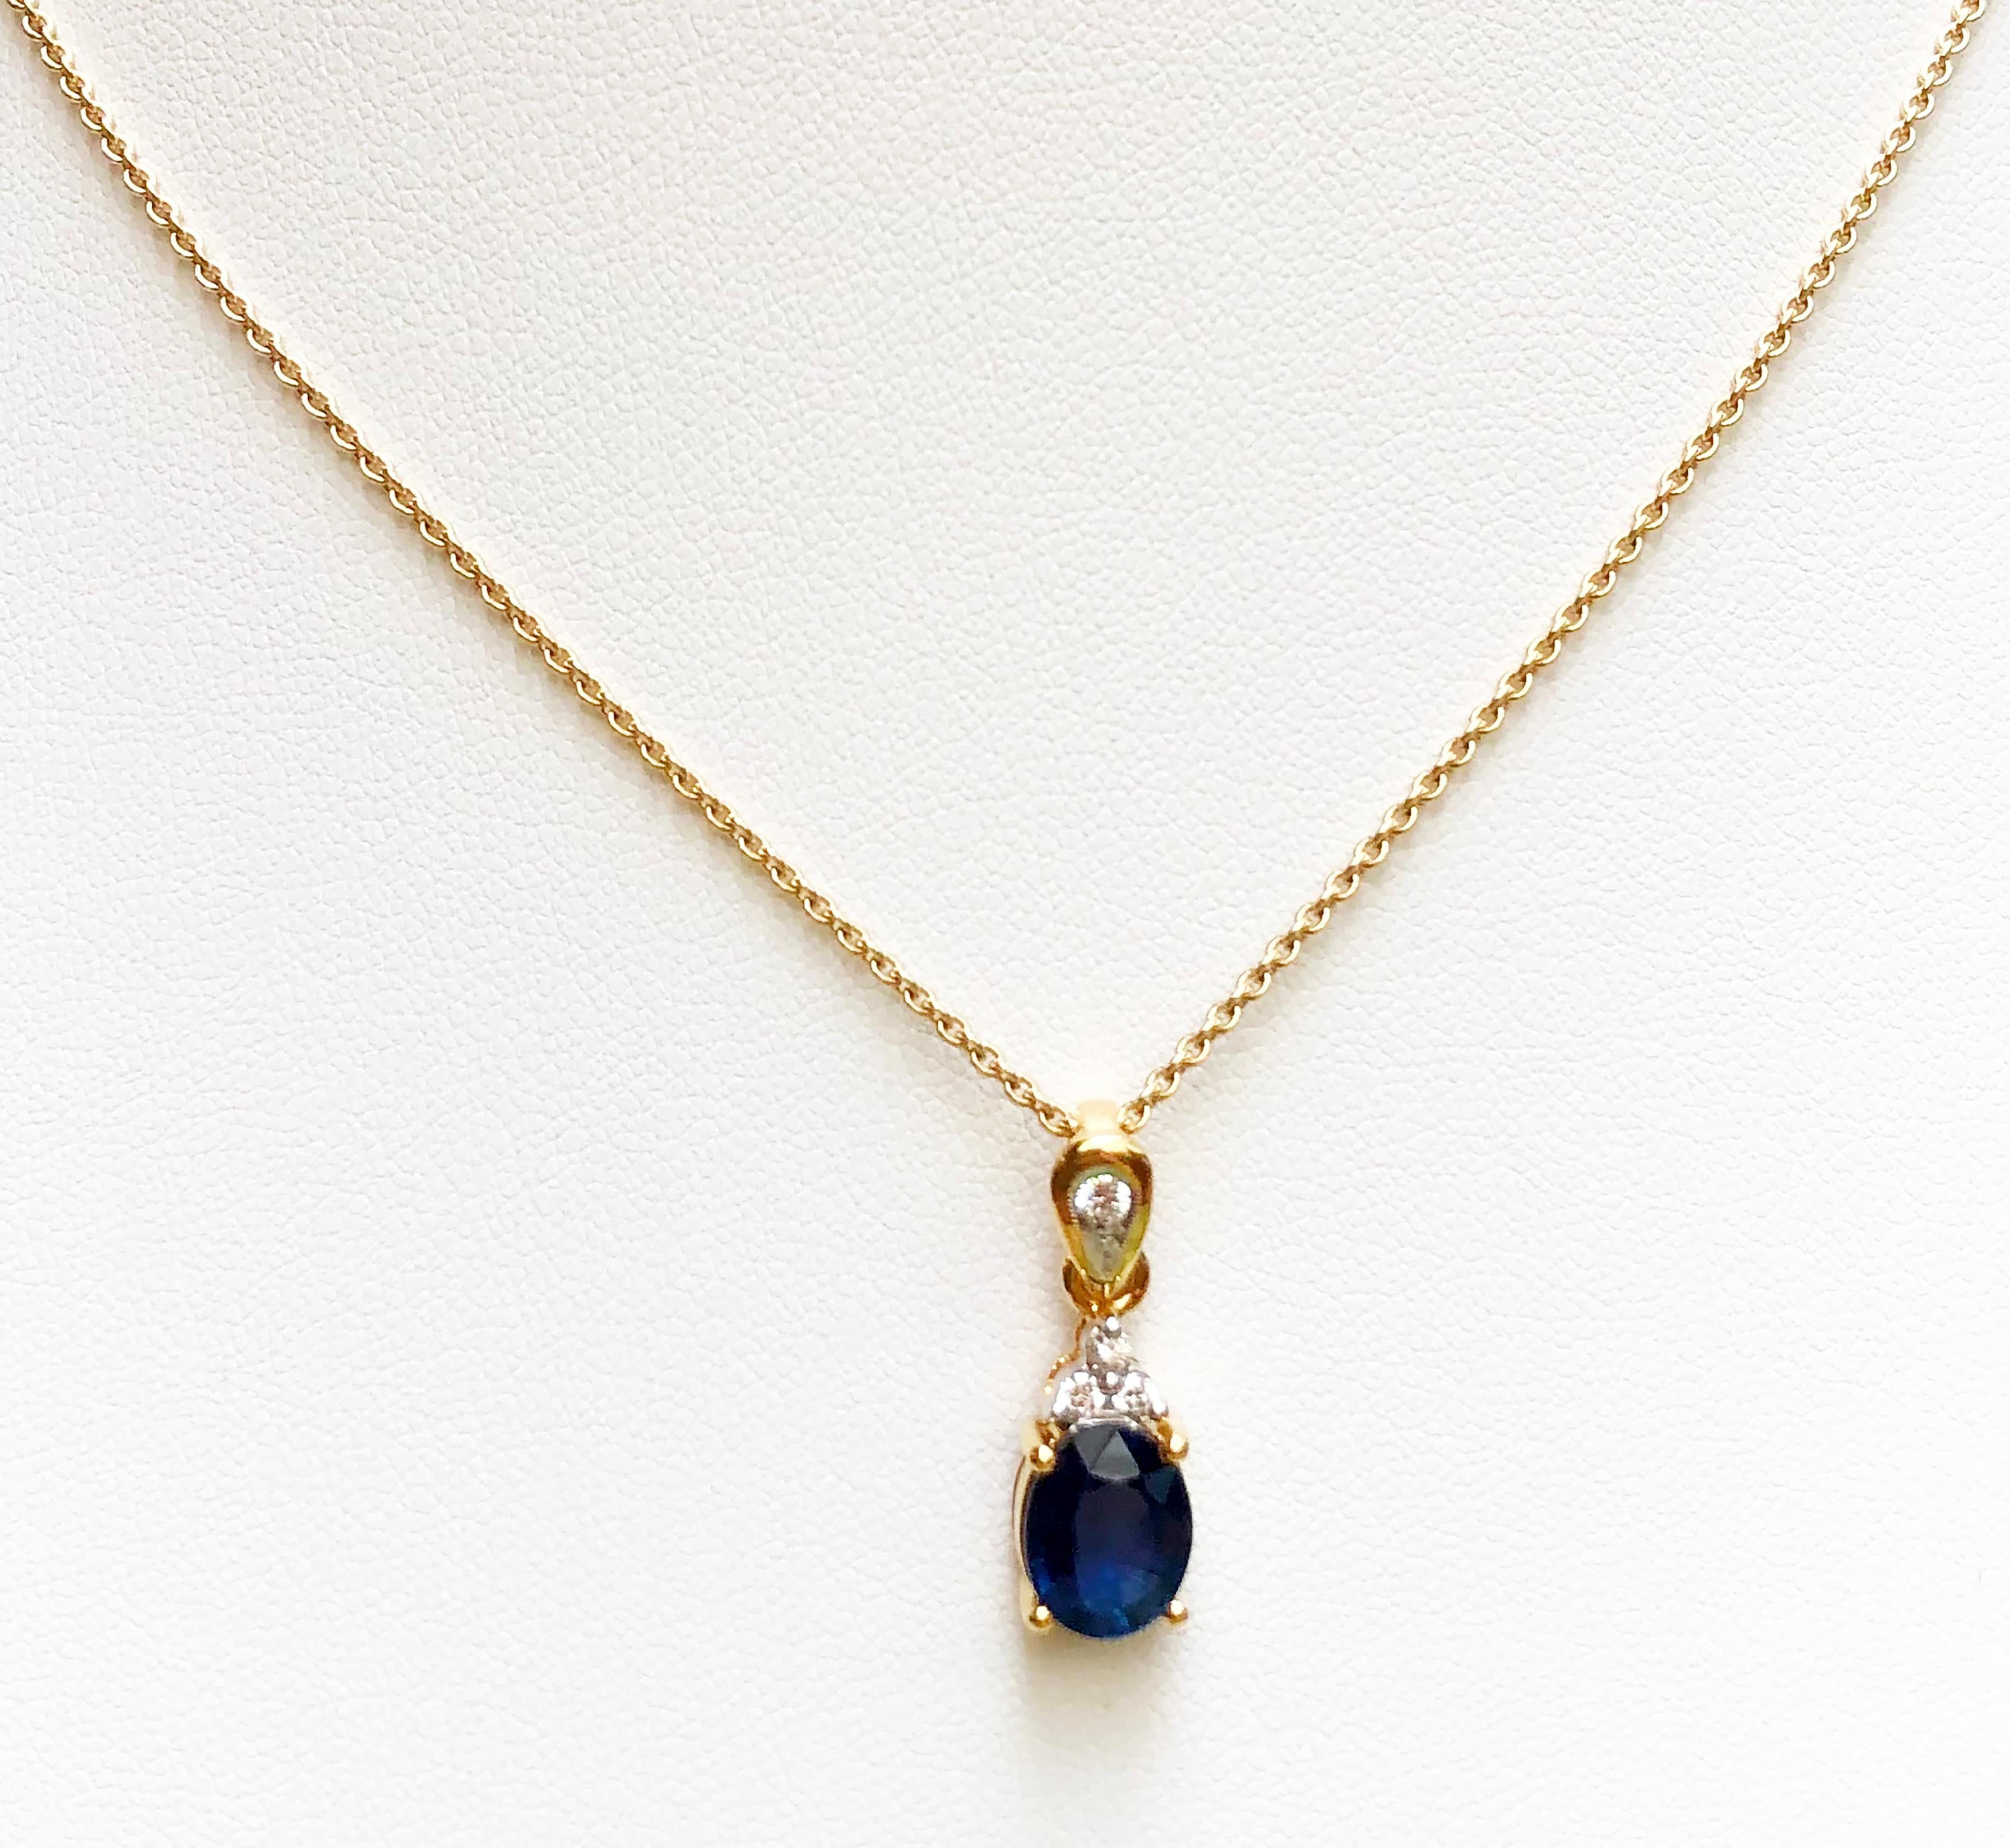 Blue Sapphire 1.90 carats with Diamond 0.11 carat Pendant set in 18 Karat Gold Settings
(chain not included)

Width:  0.8 cm 
Length: 2.2 cm
Total Weight: 2.65 grams

